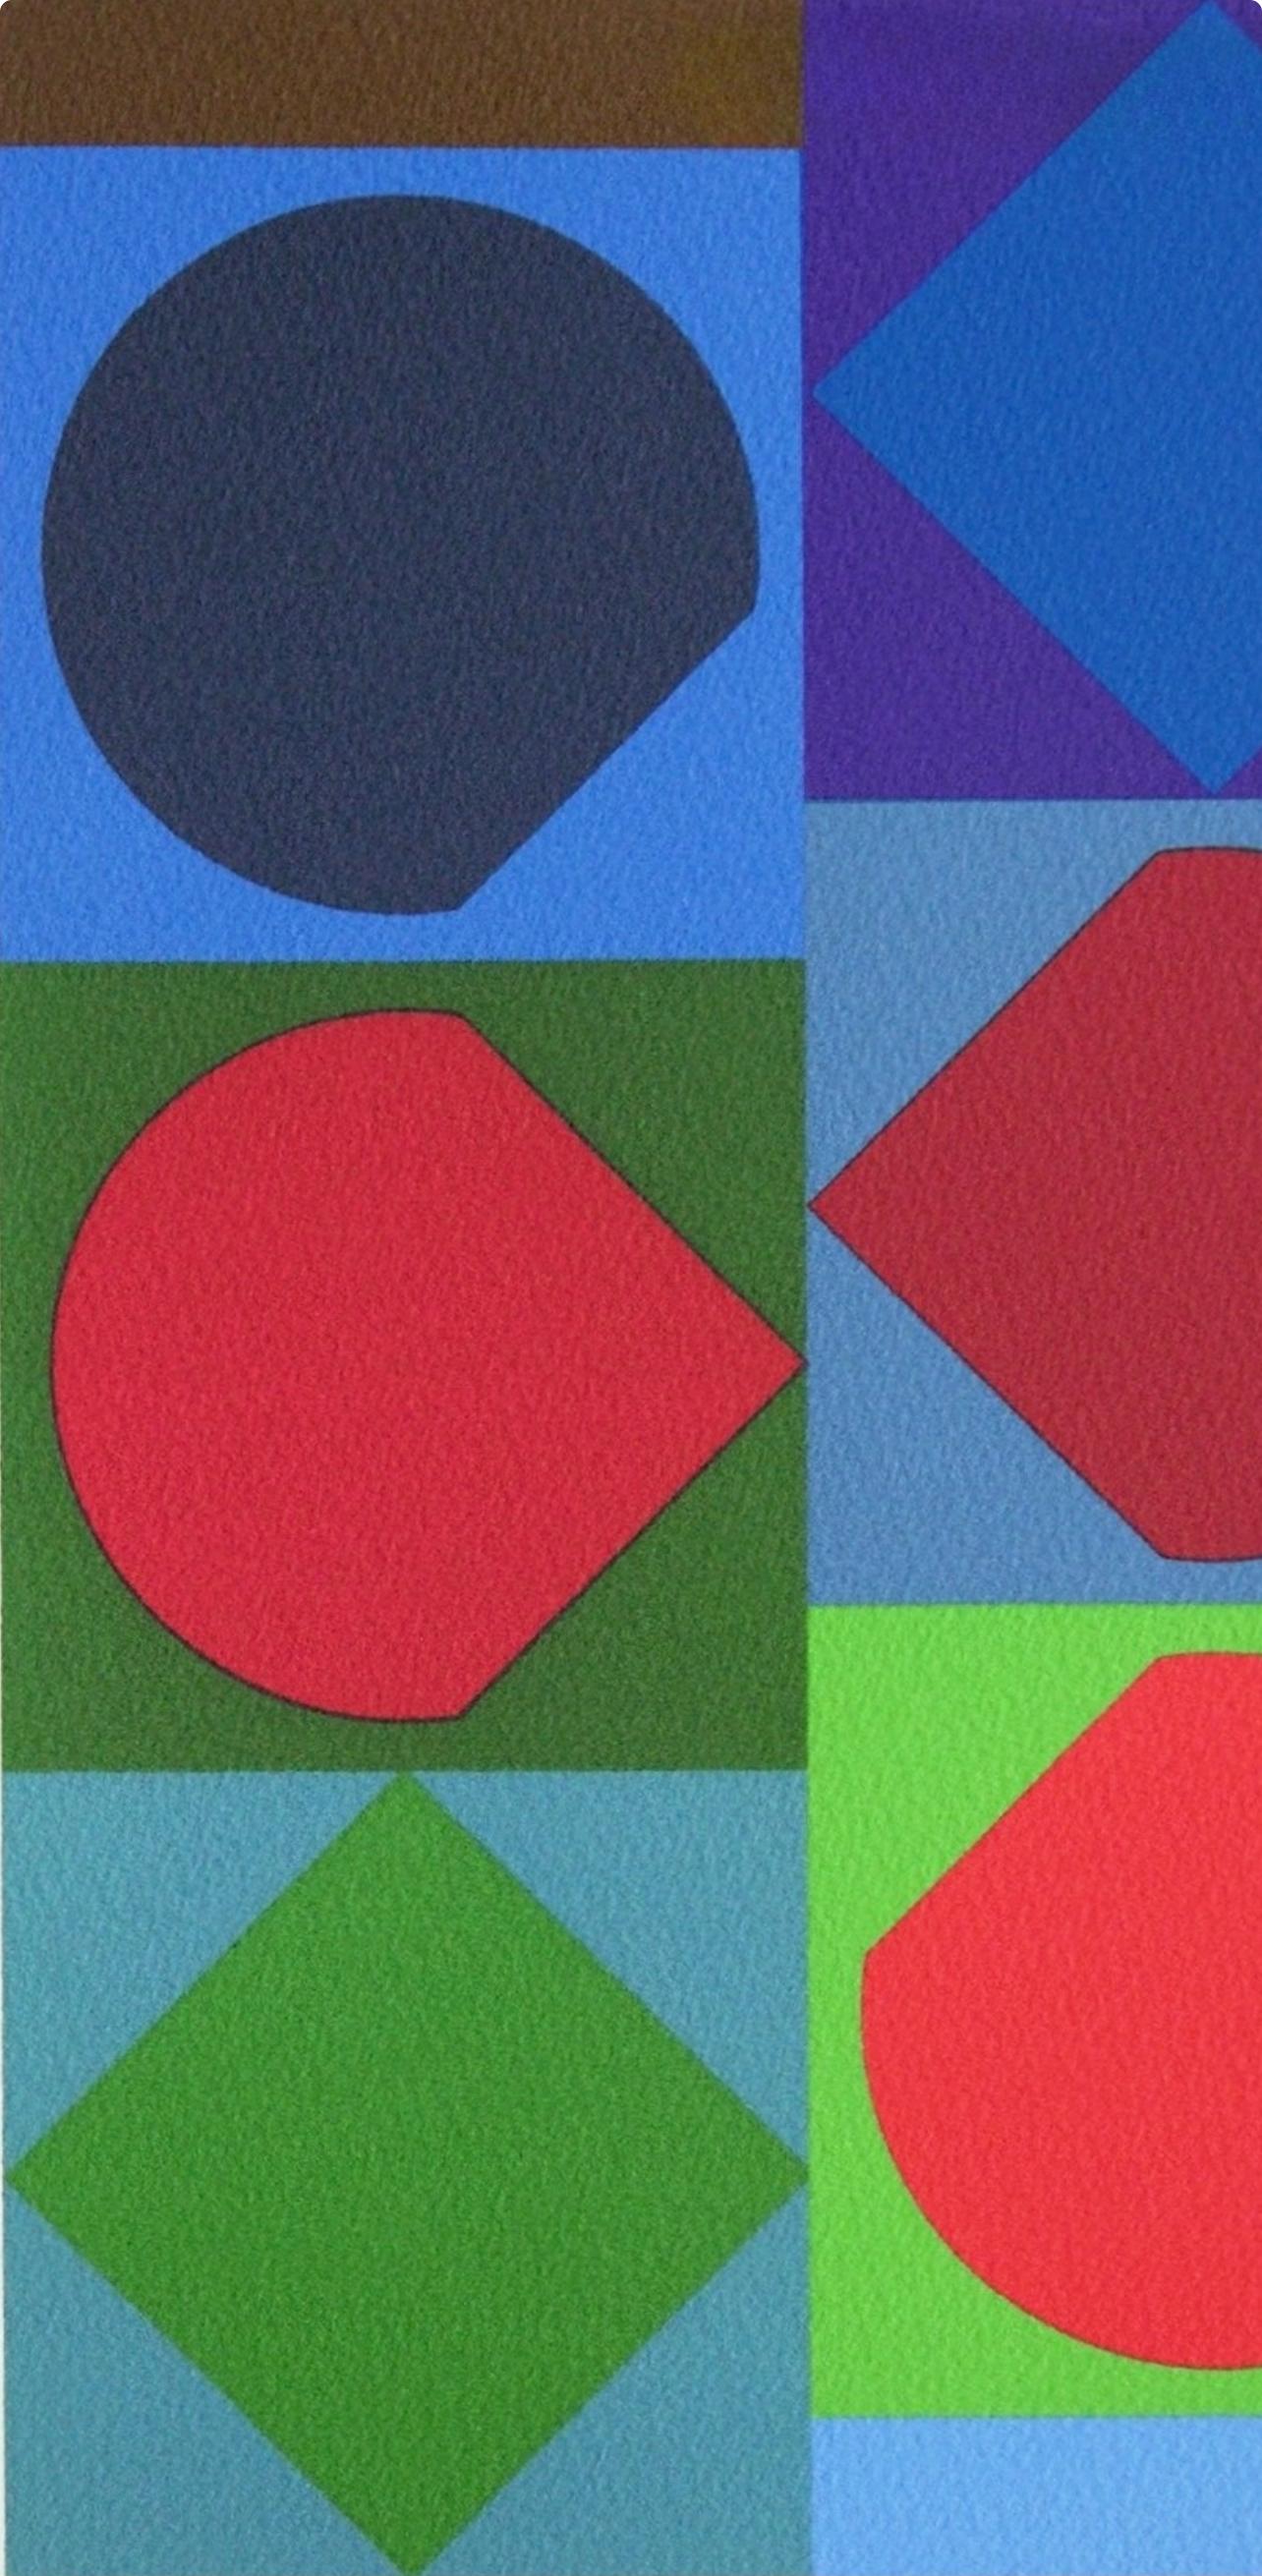 Vasarely, Beryll, Souvenirs et portraits d'artistes (after) - Print by Victor Vasarely